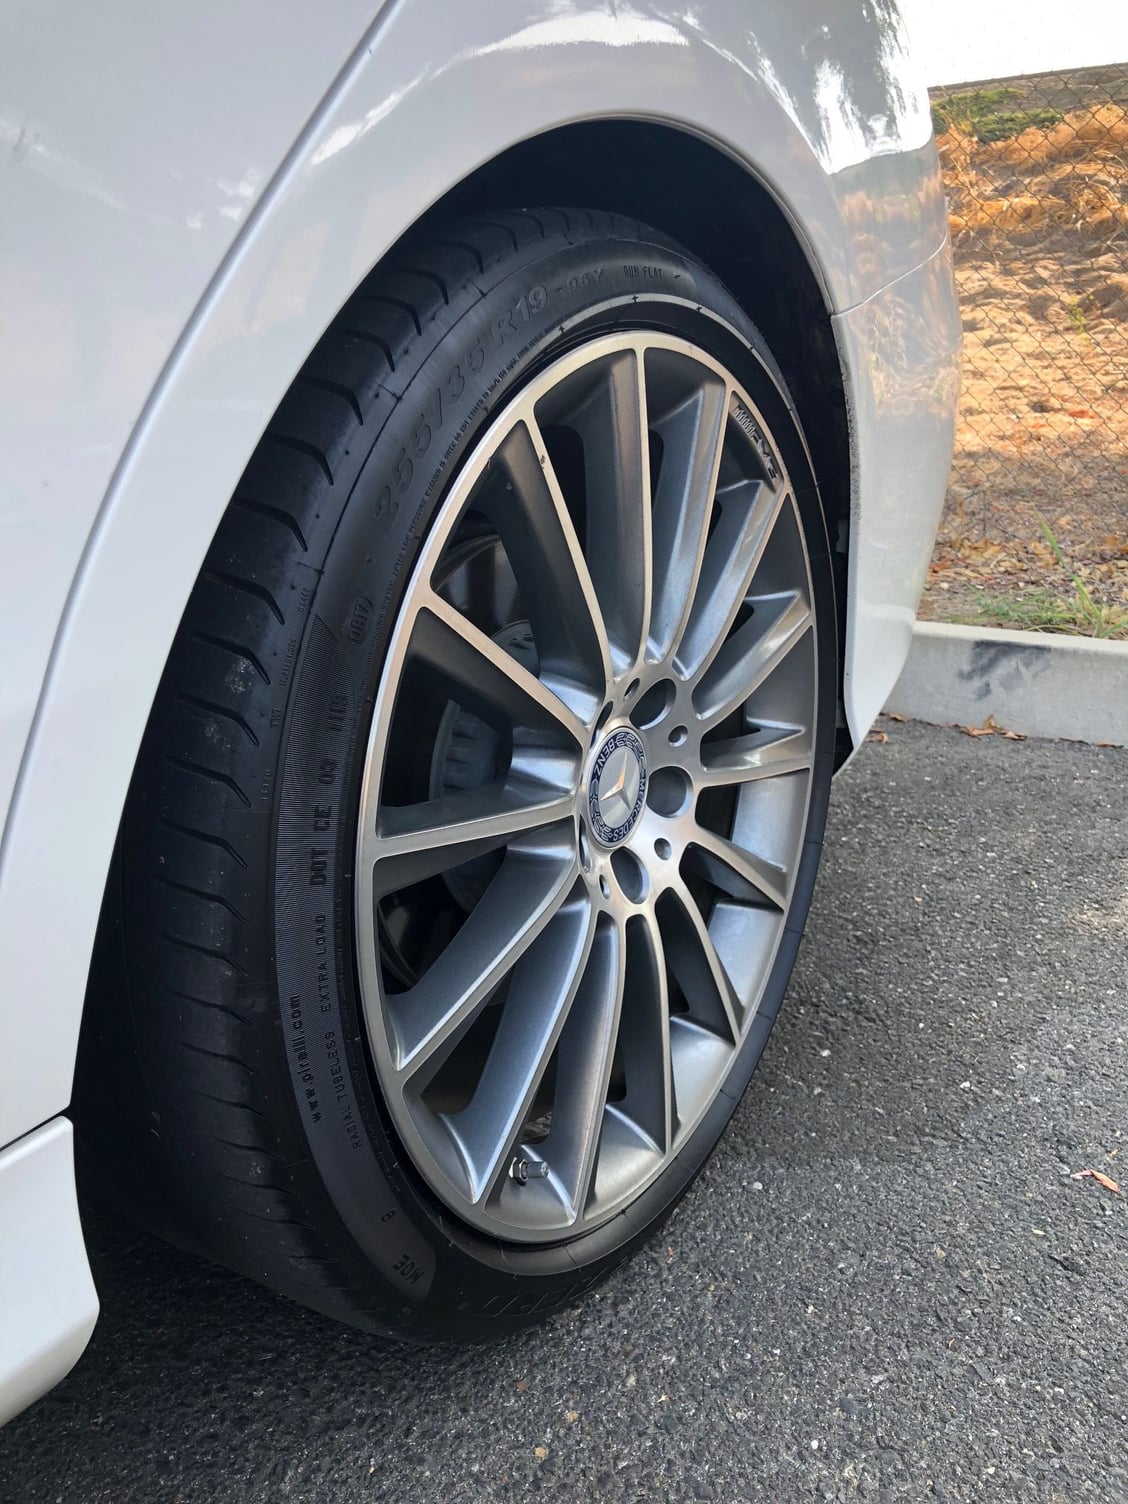 Wheels and Tires/Axles - 19" AMG rims plus tires - Used - Yuba City, CA 95993, United States